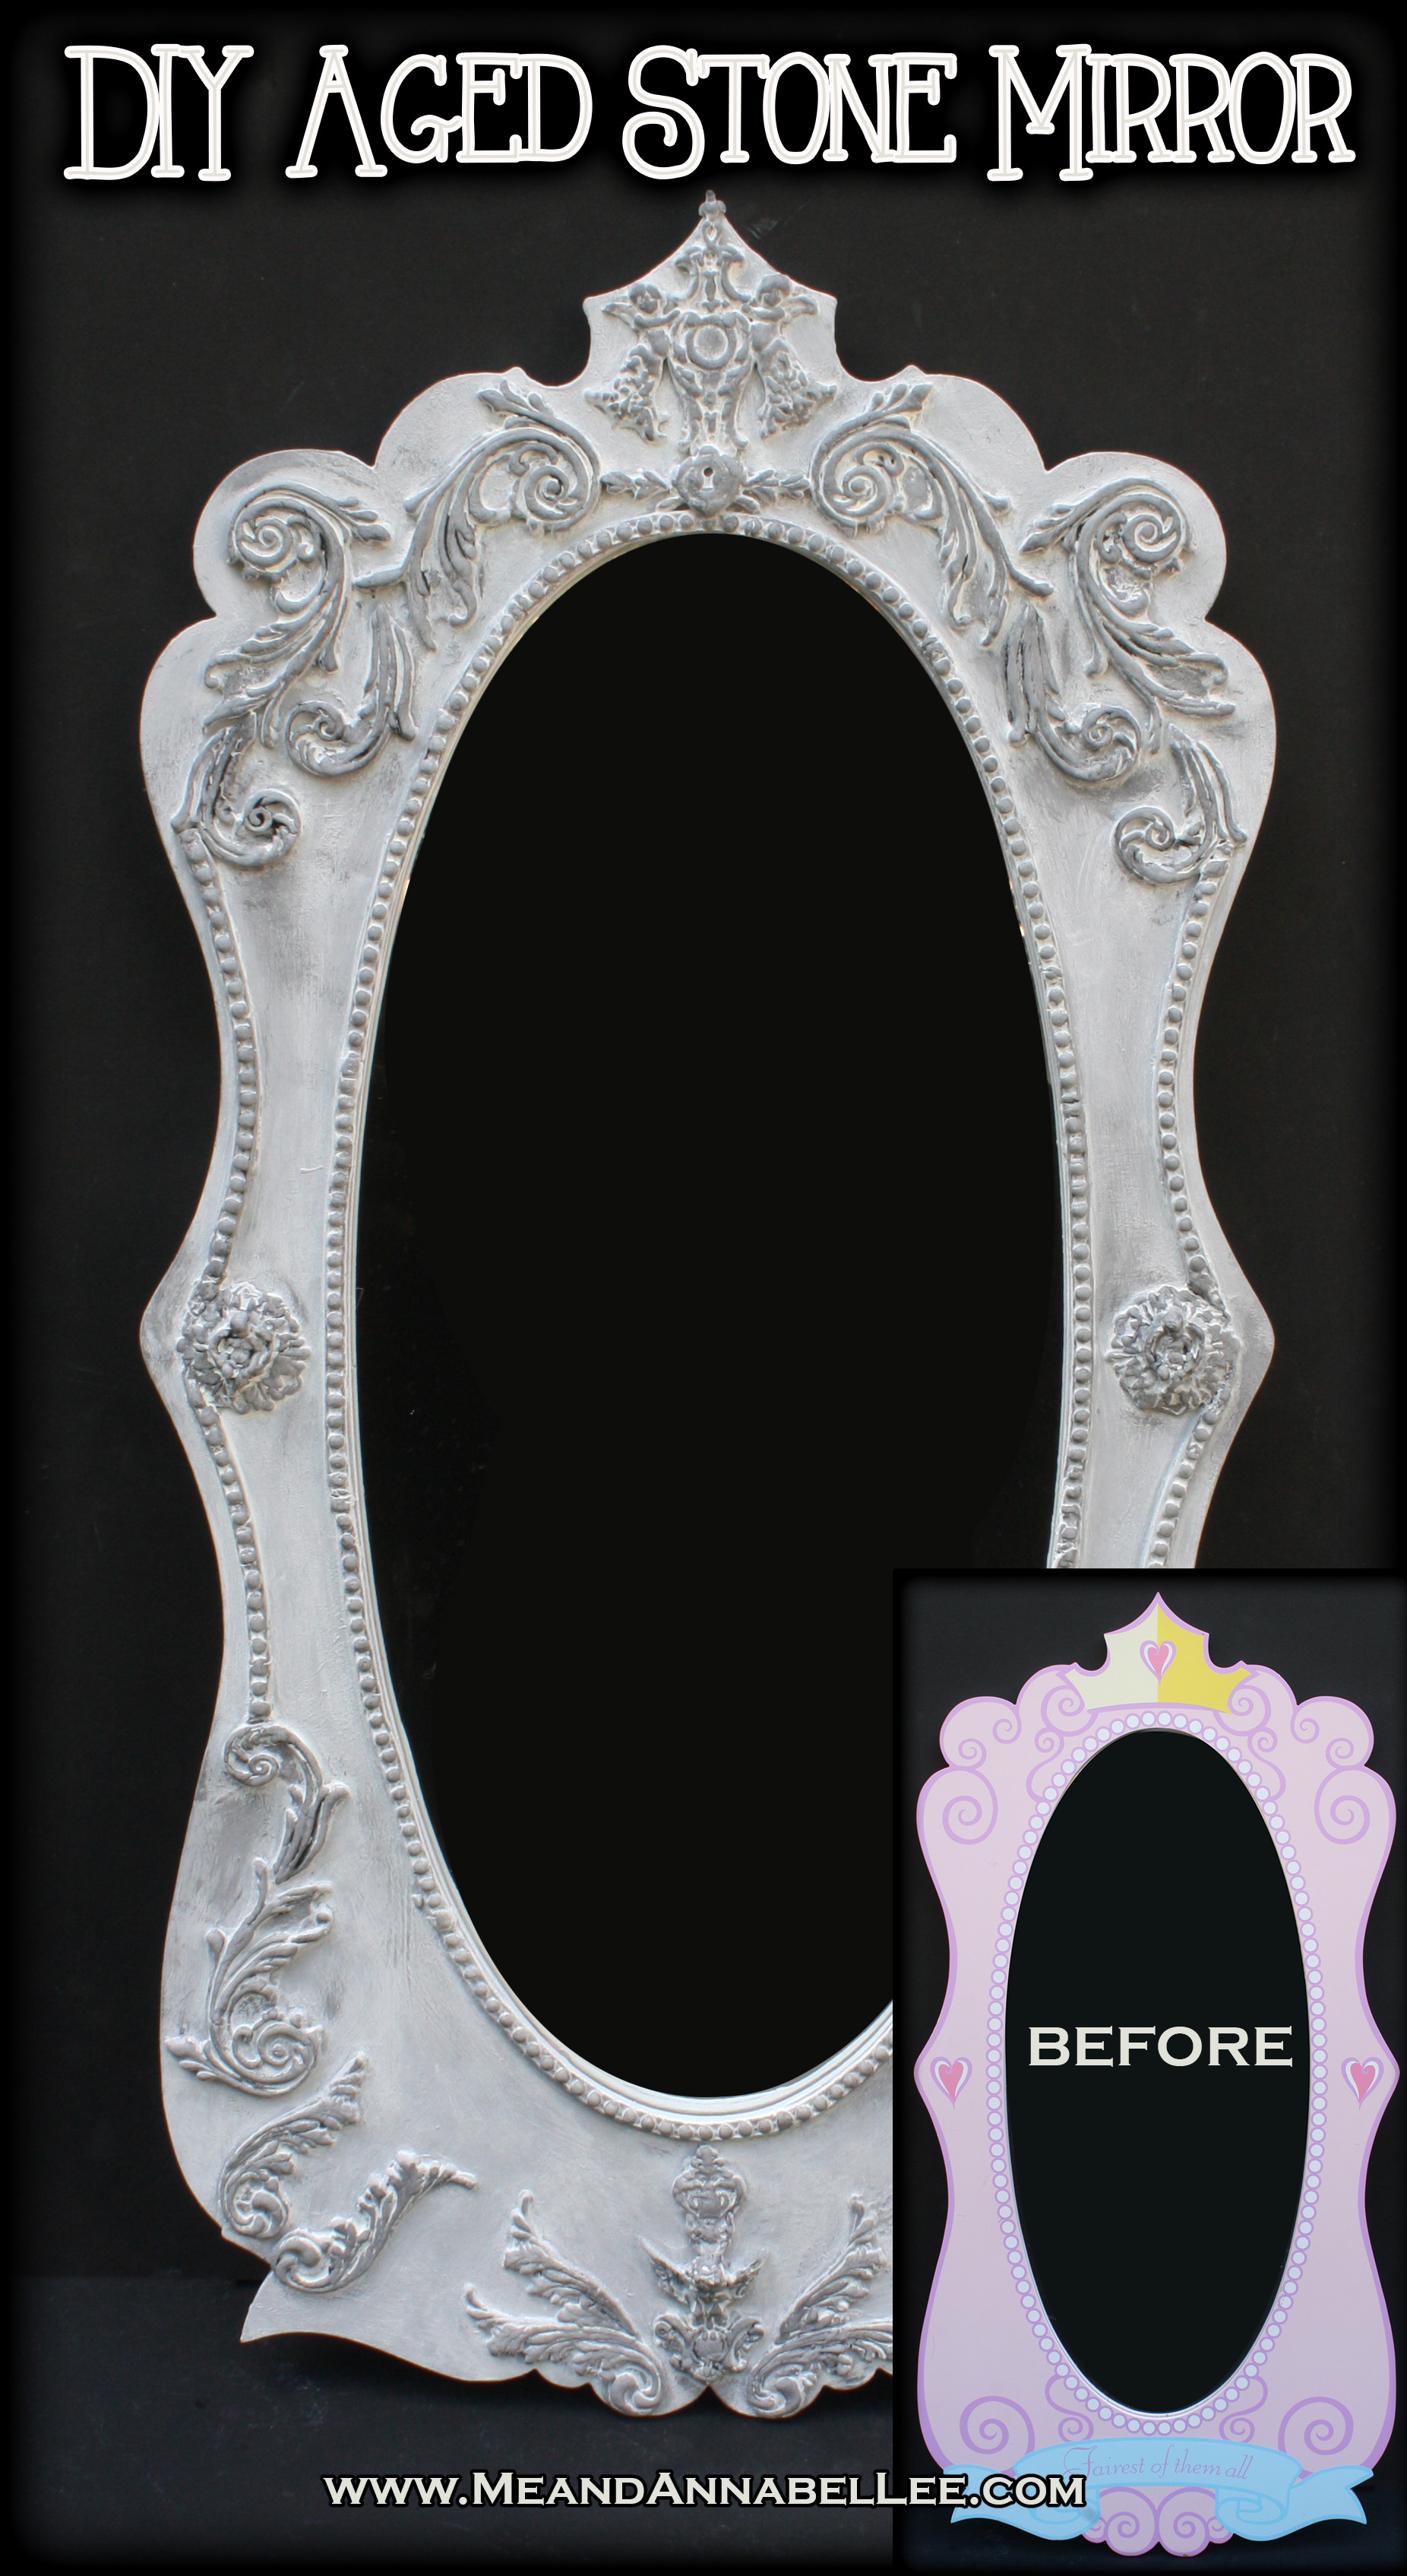 DIY Baroque Mirror in a Weathered Stone Grey Antique Finish | Distress and Antique a Frame | Paper Clay Casting | Faux Paint | Iron Orchid Molds | White Gesso | www.MeandAnnabelLee.com